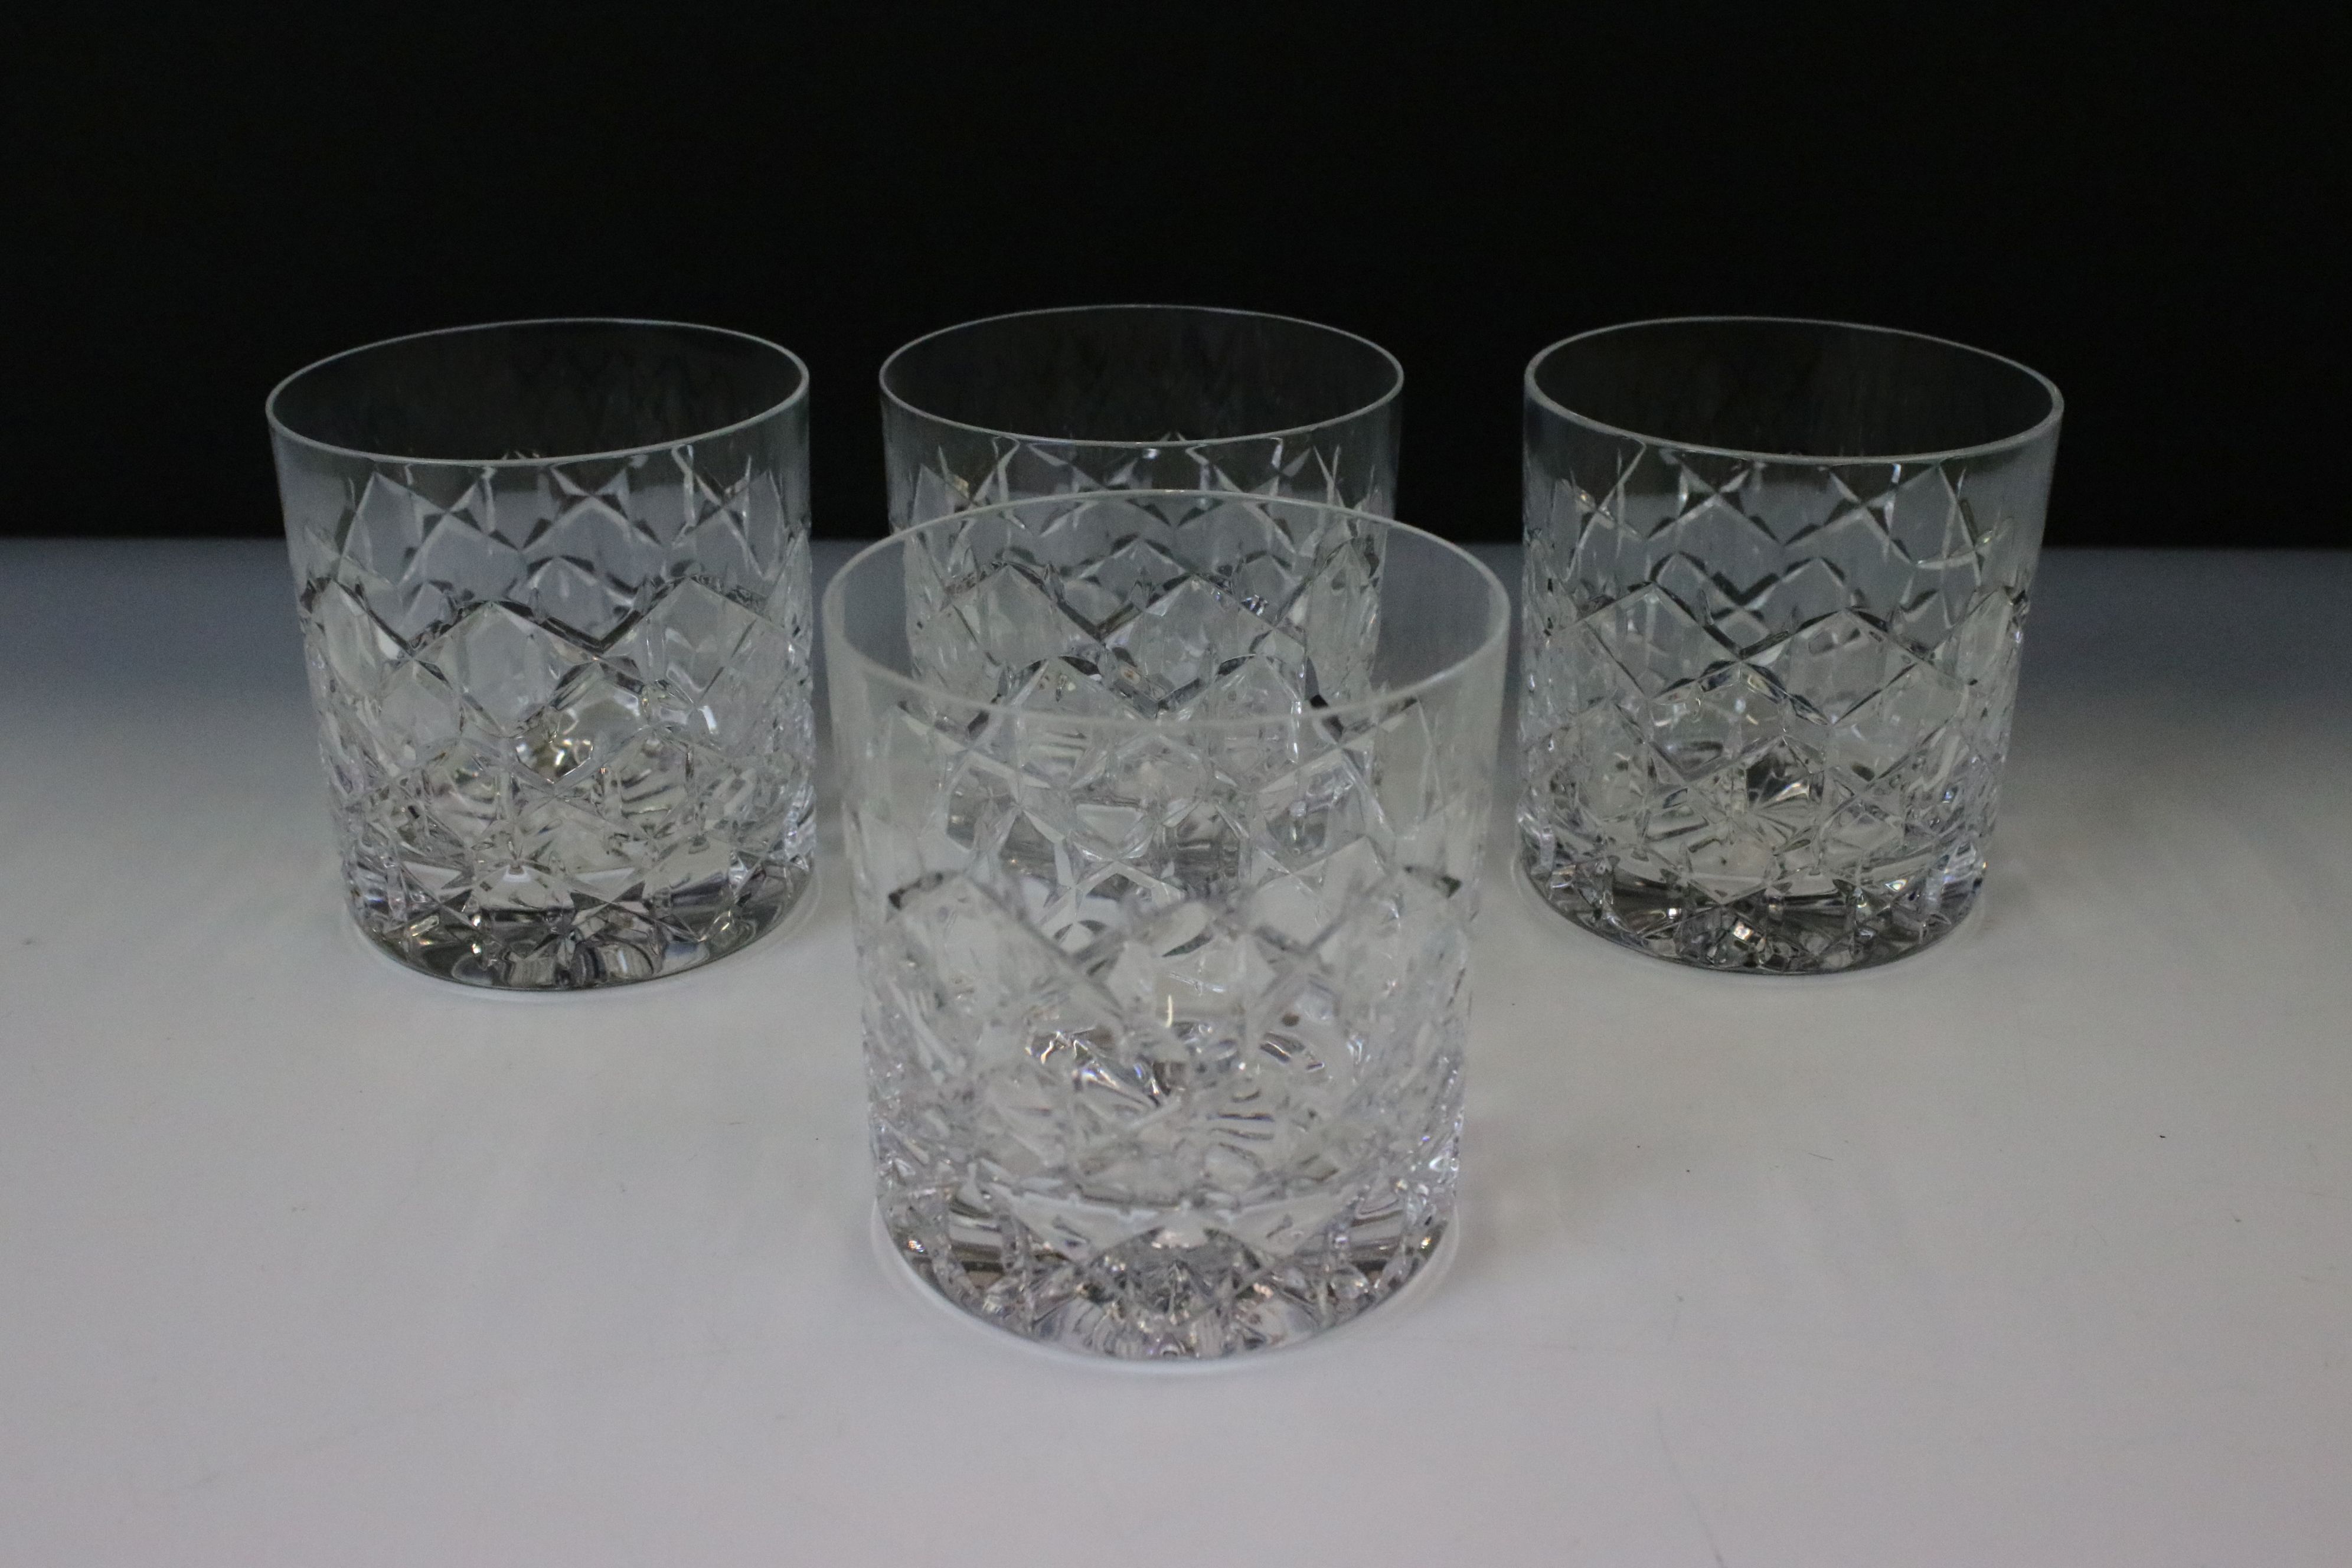 Tiffany & Co Boxed Set of Four Crystal Cut Glass Whiskey Tumblers (8.5cm high), together with a - Image 2 of 5